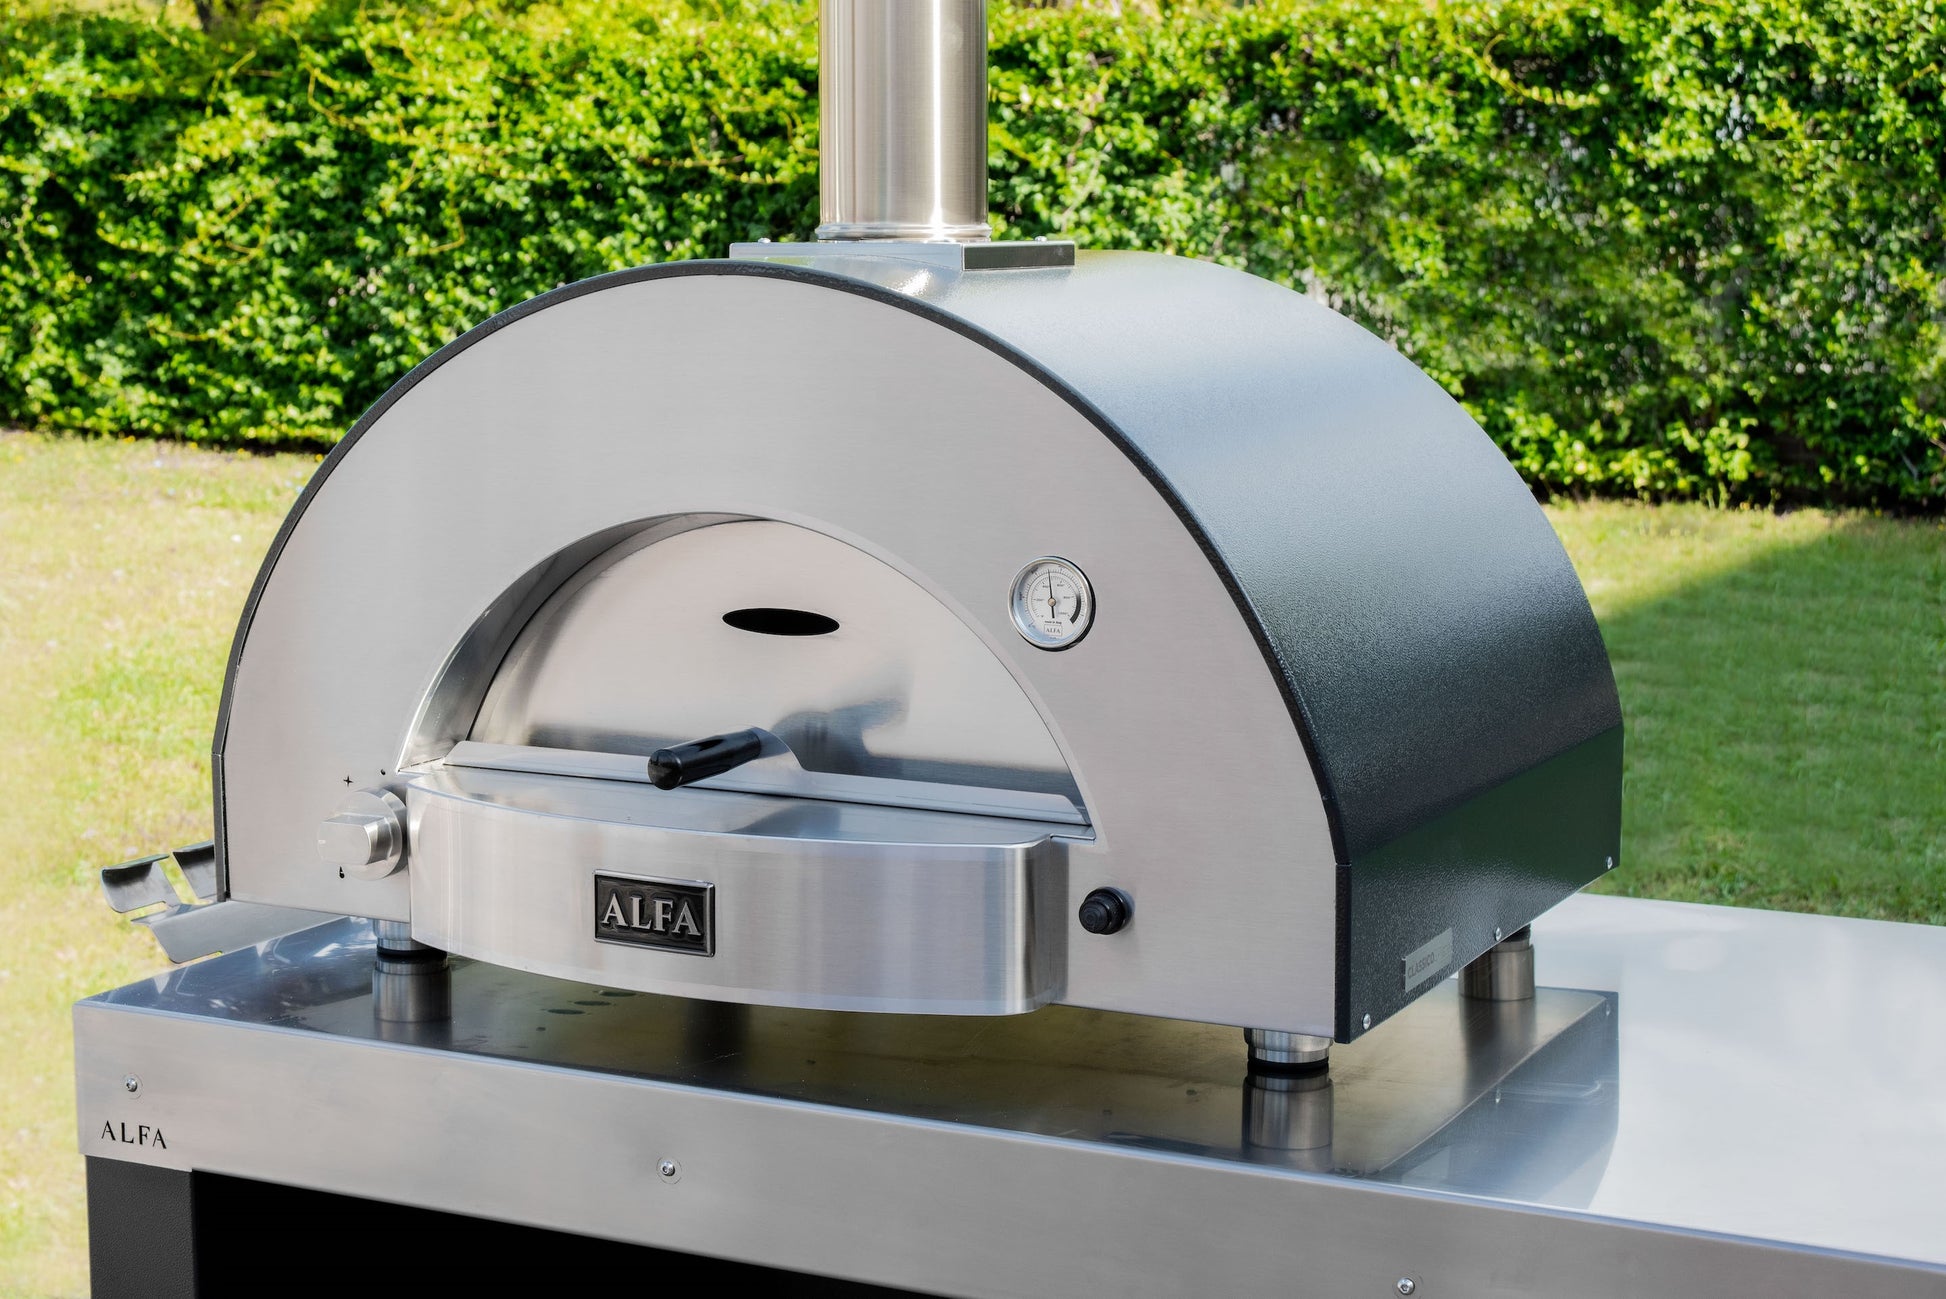 Alfa Classico 2 Pizza Oven on Alfa stainless steel table